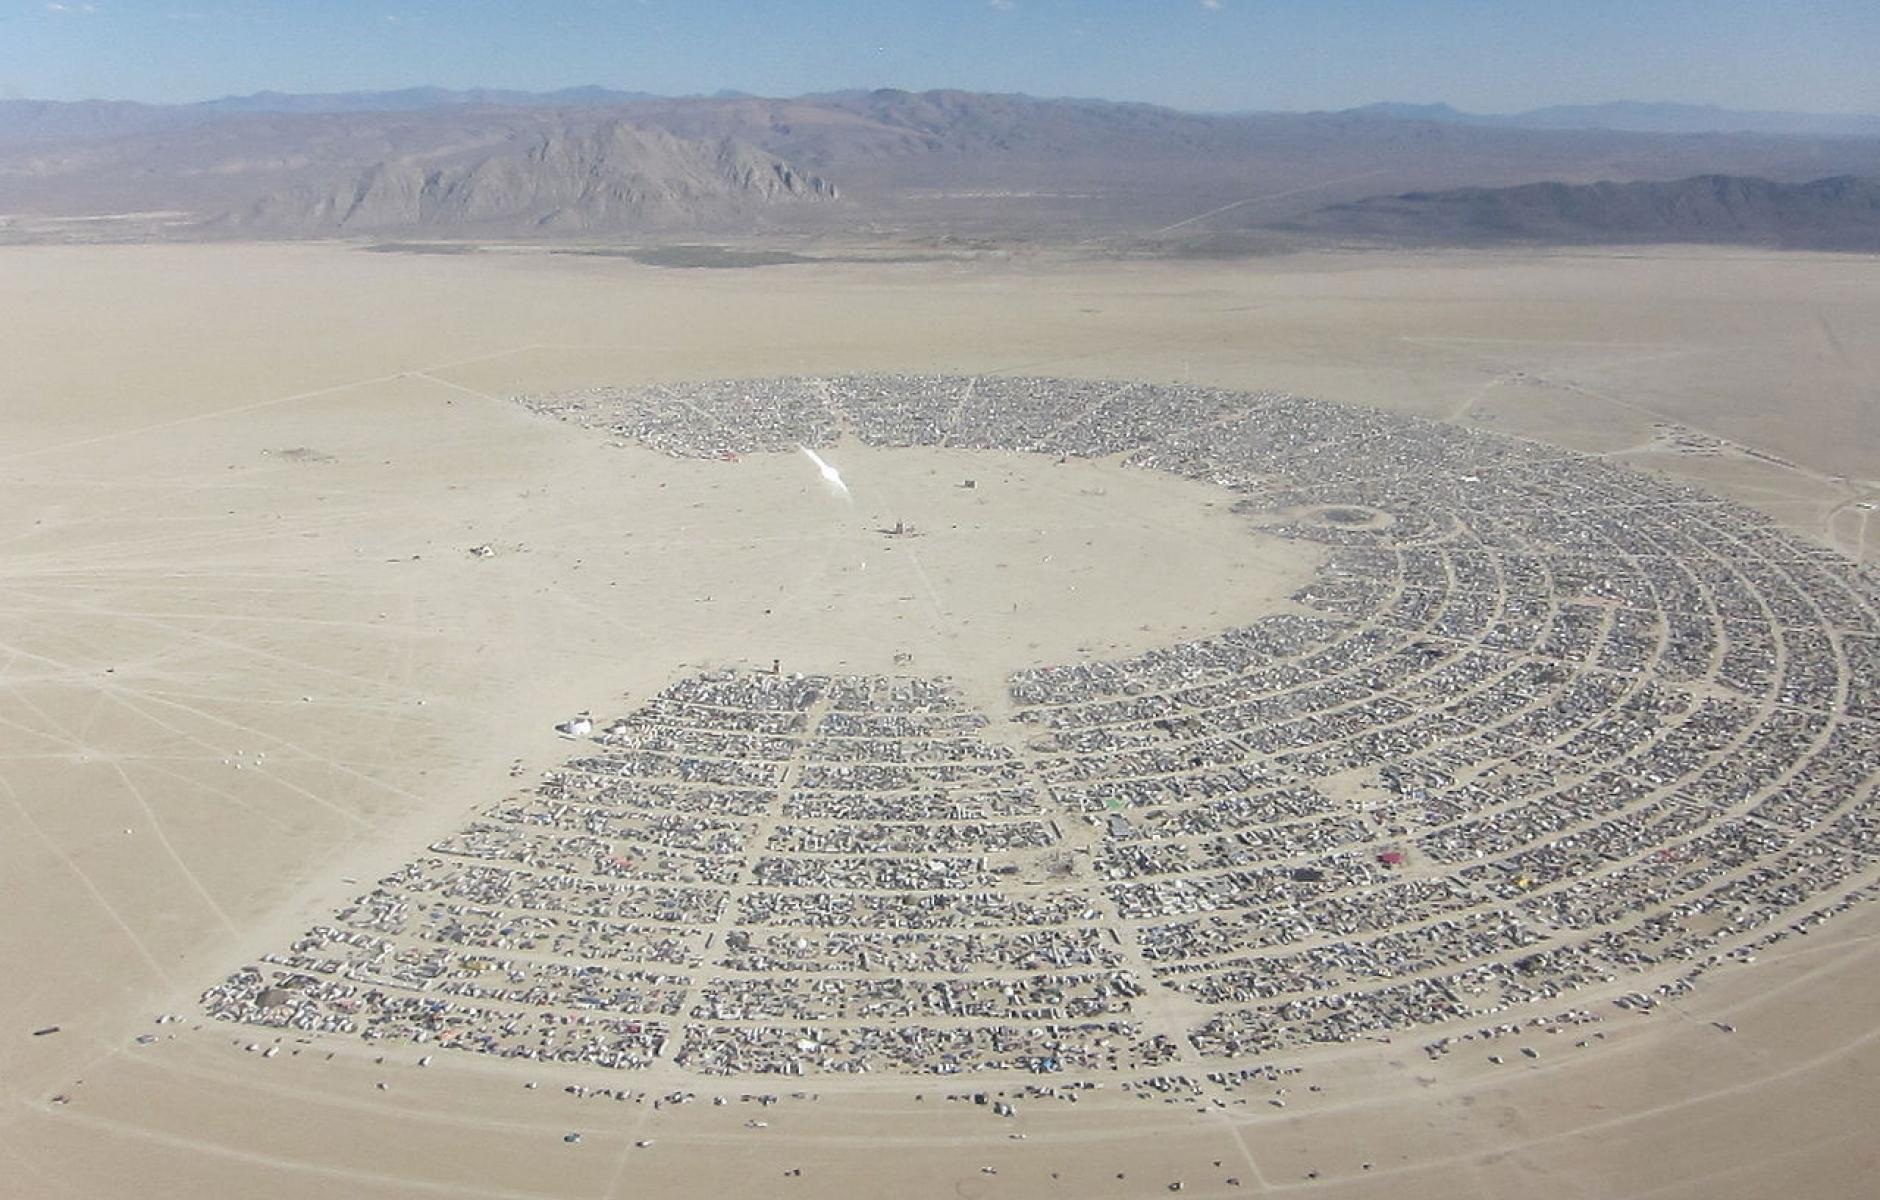 Black Rock City Burning Man event from the air